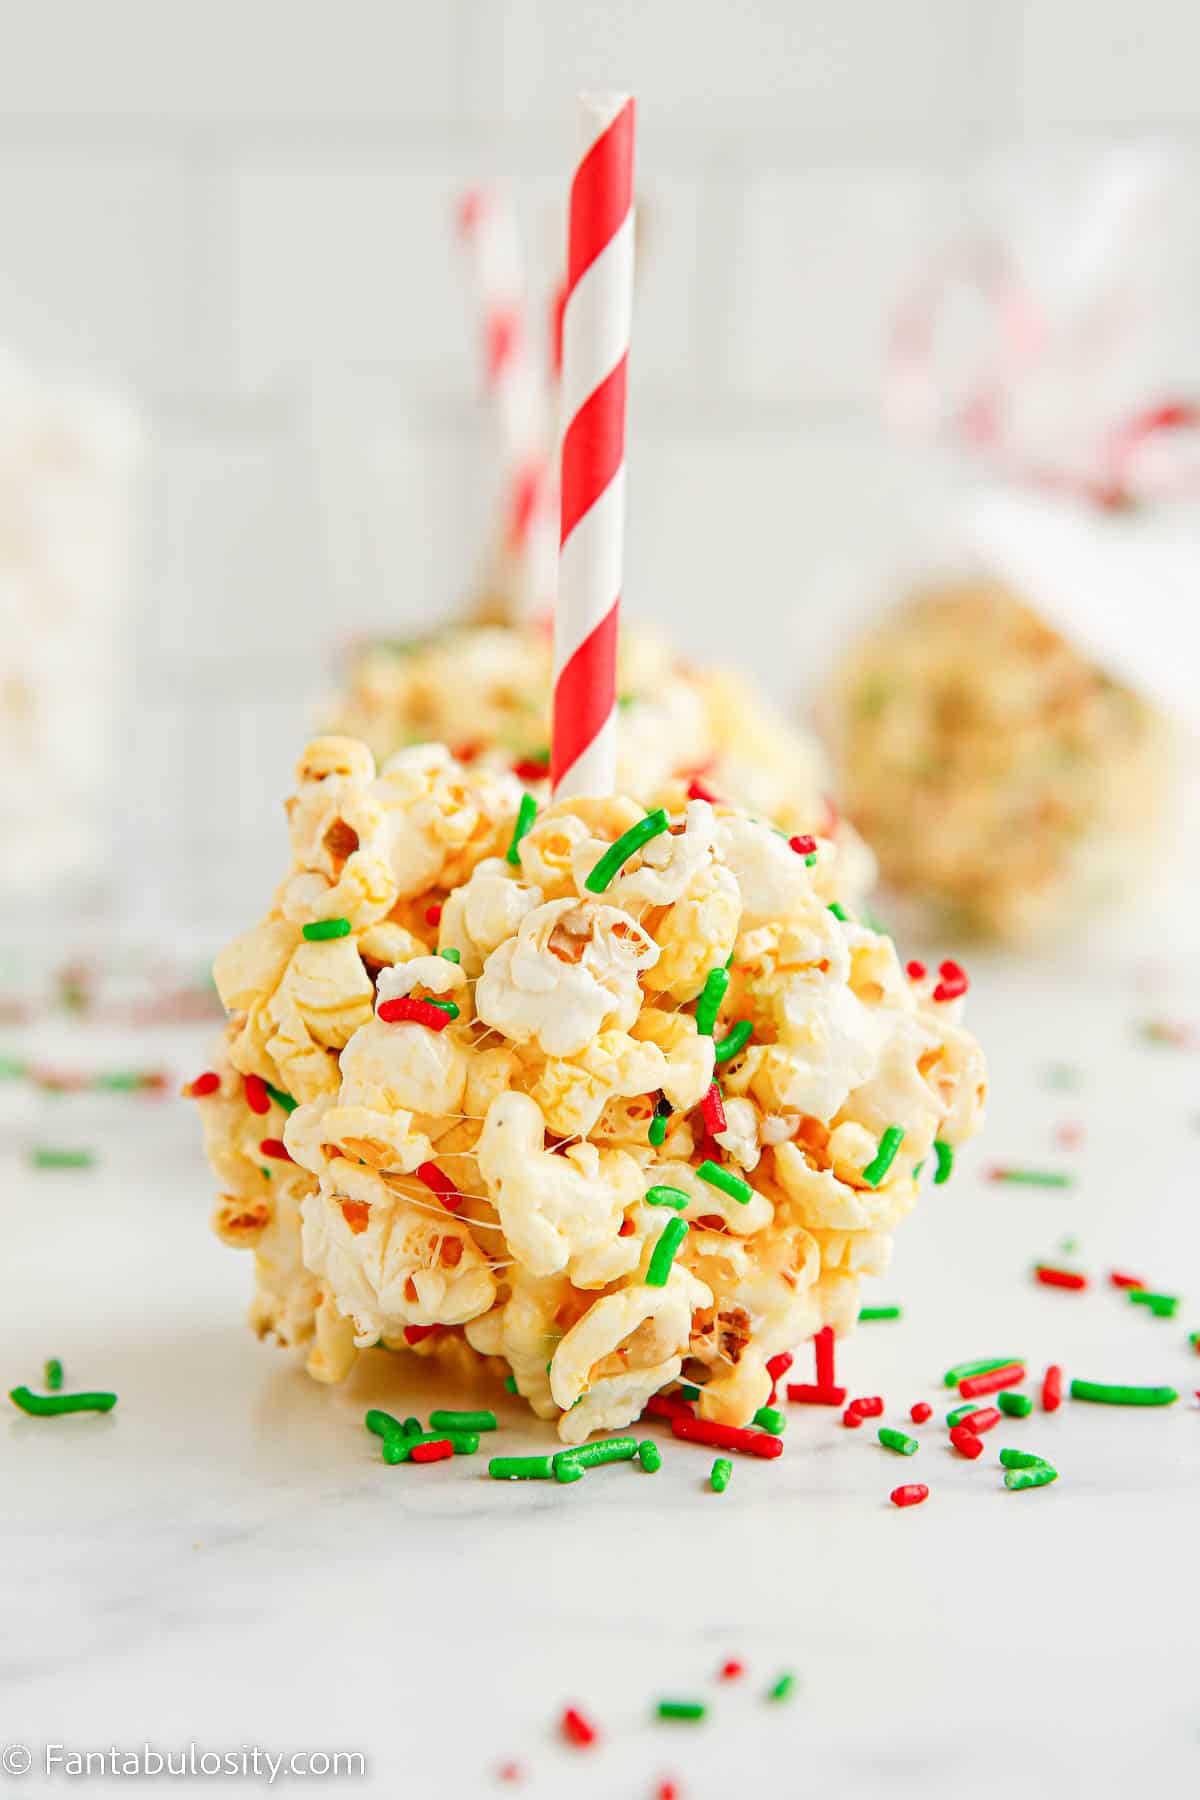 A red and white paper straw has been cut in half and inserted into the center of a sprinkle covered marshmallow popcorn ball